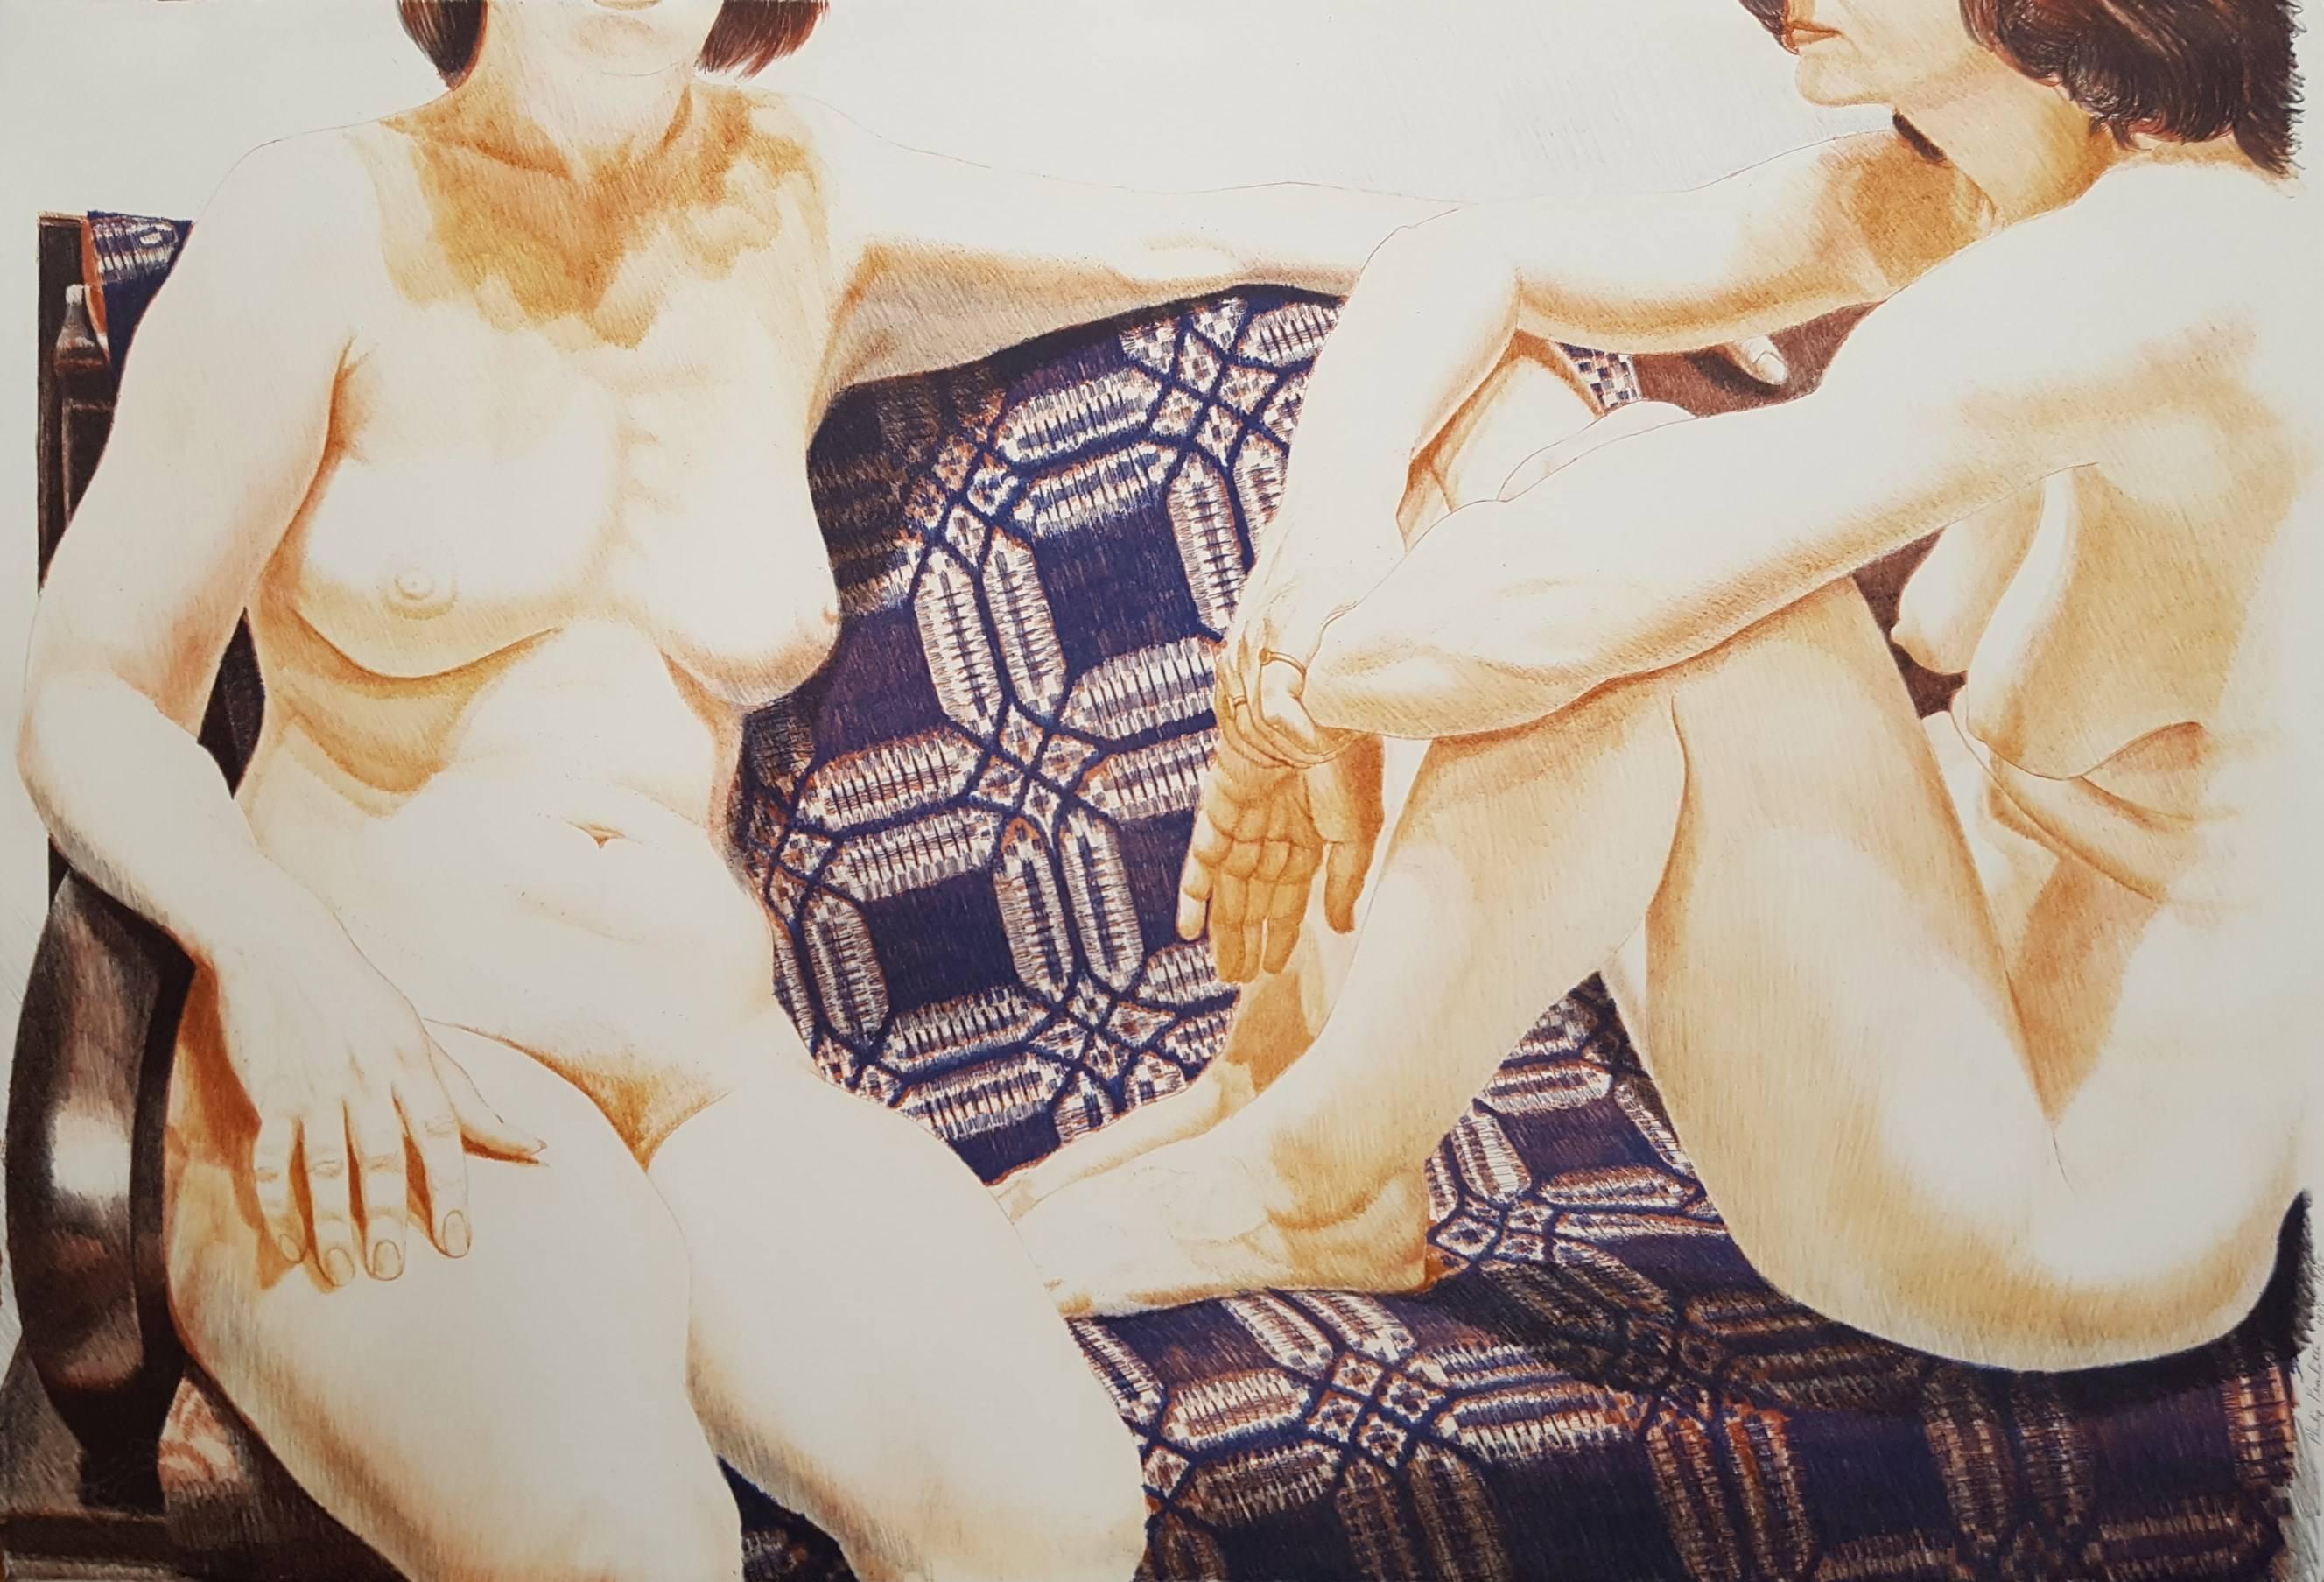 Philip Pearlstein Nude Print - Two Nudes on Blue Coverlet